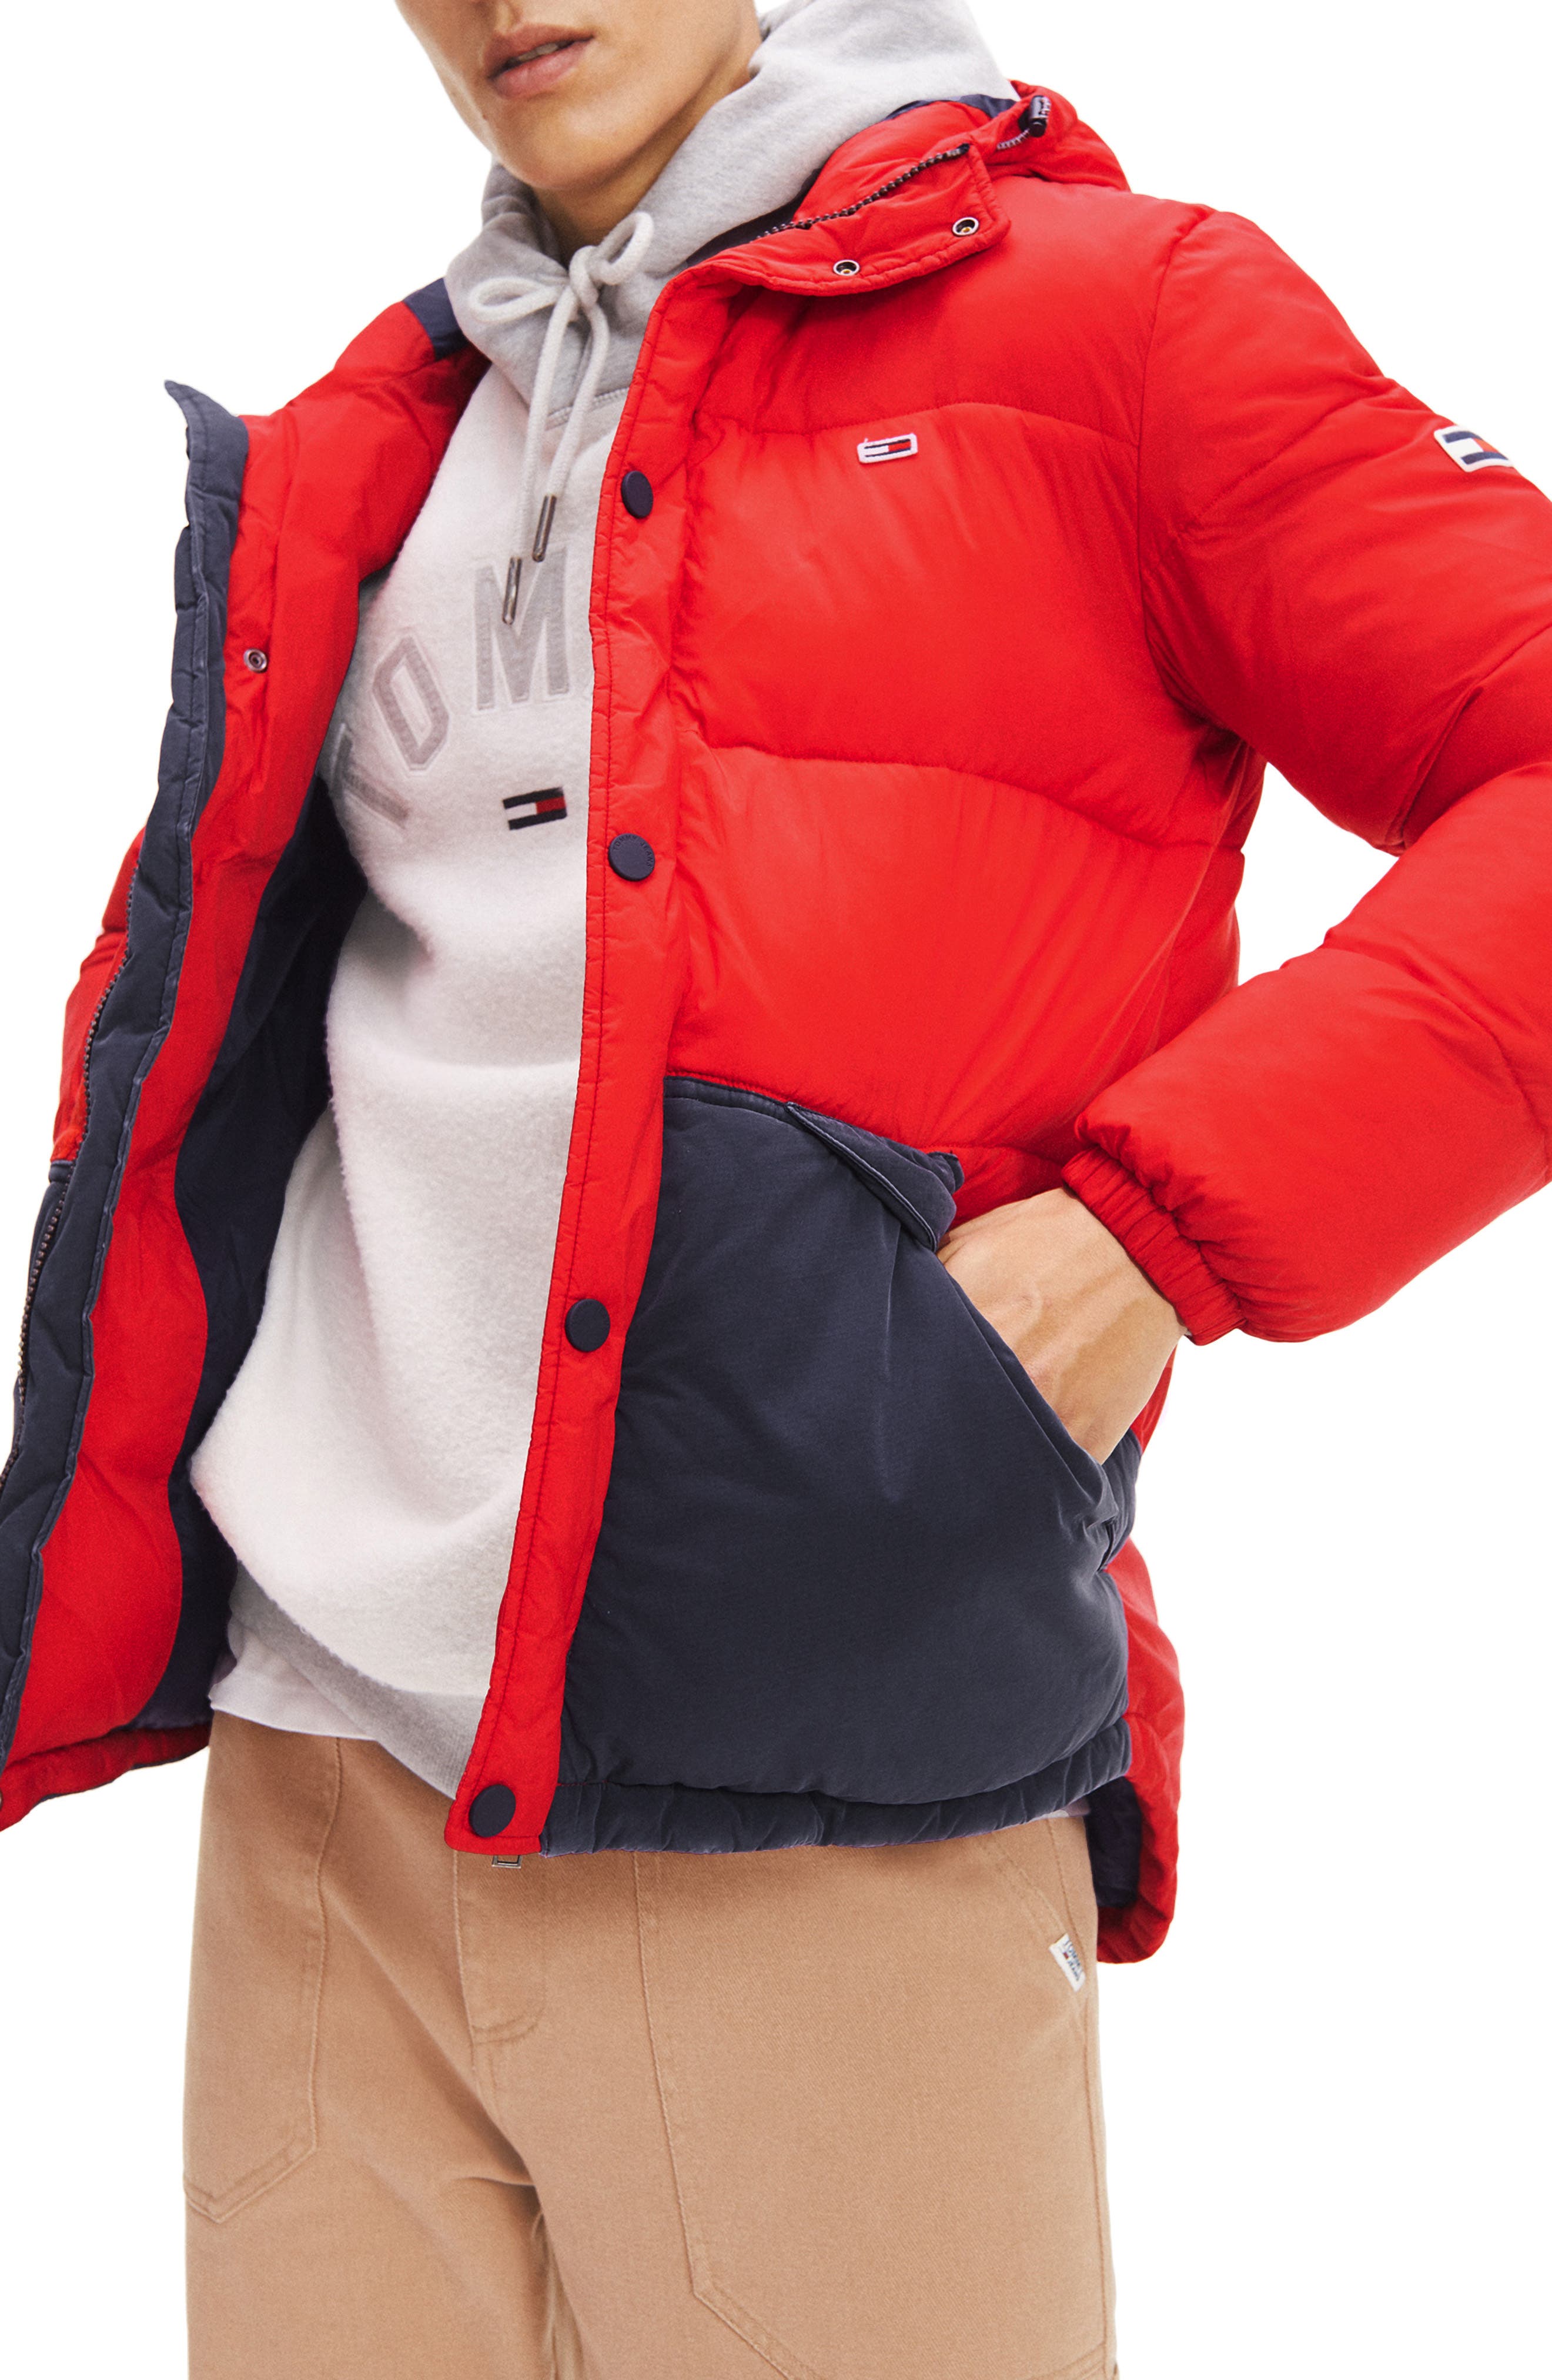 north face expedition fleece